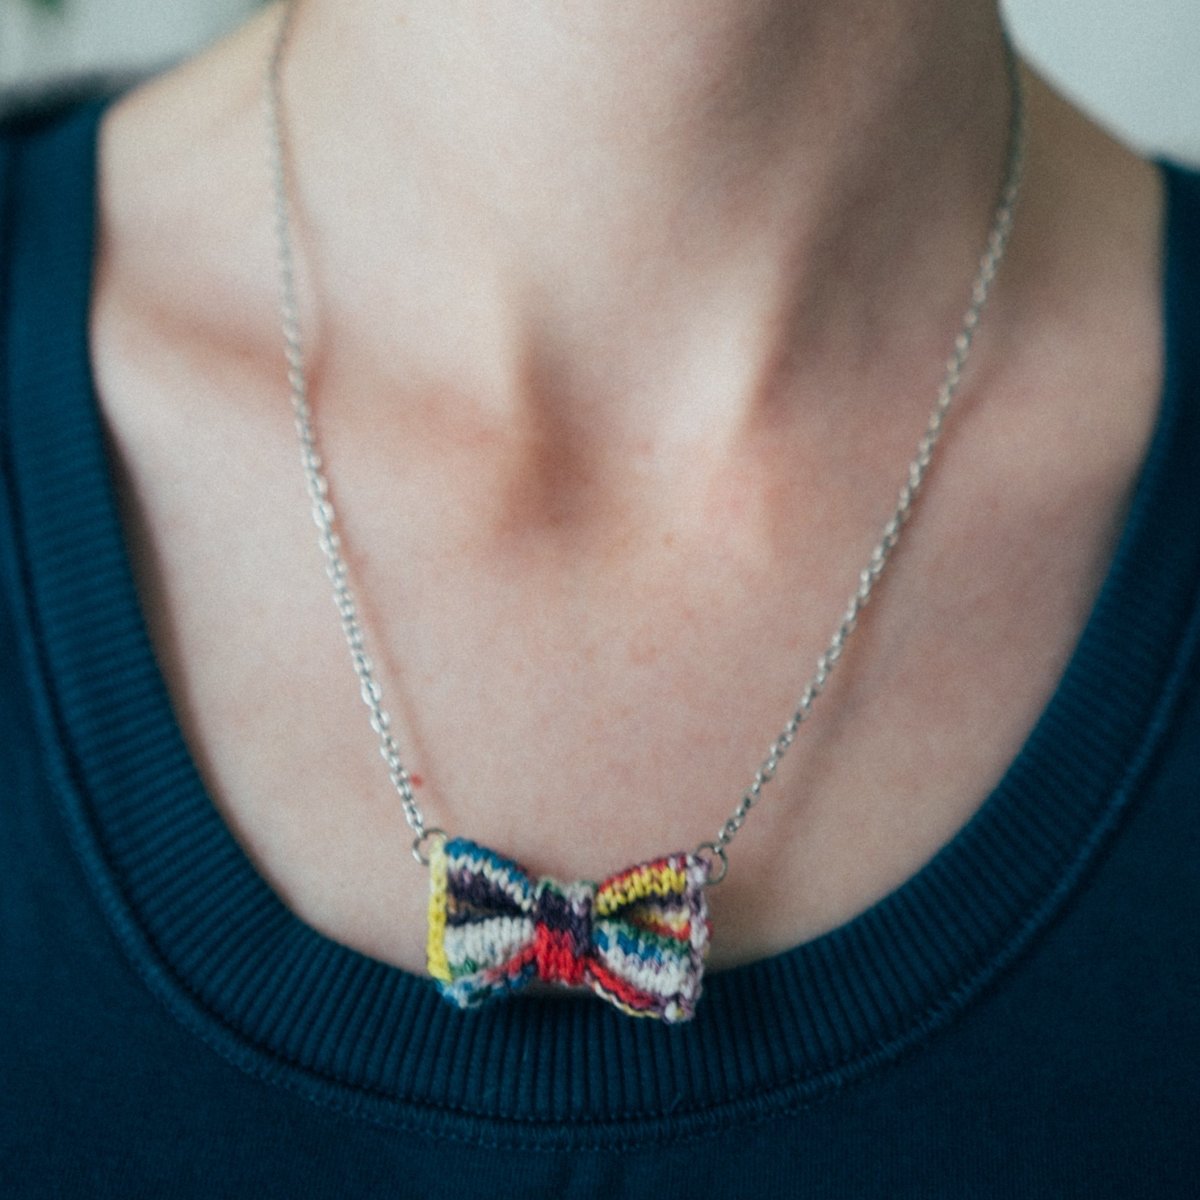 Hand-dyed Bow Tie Necklace + Cat or Dog Bow Tie Set (Special Edition) - Wool & Water